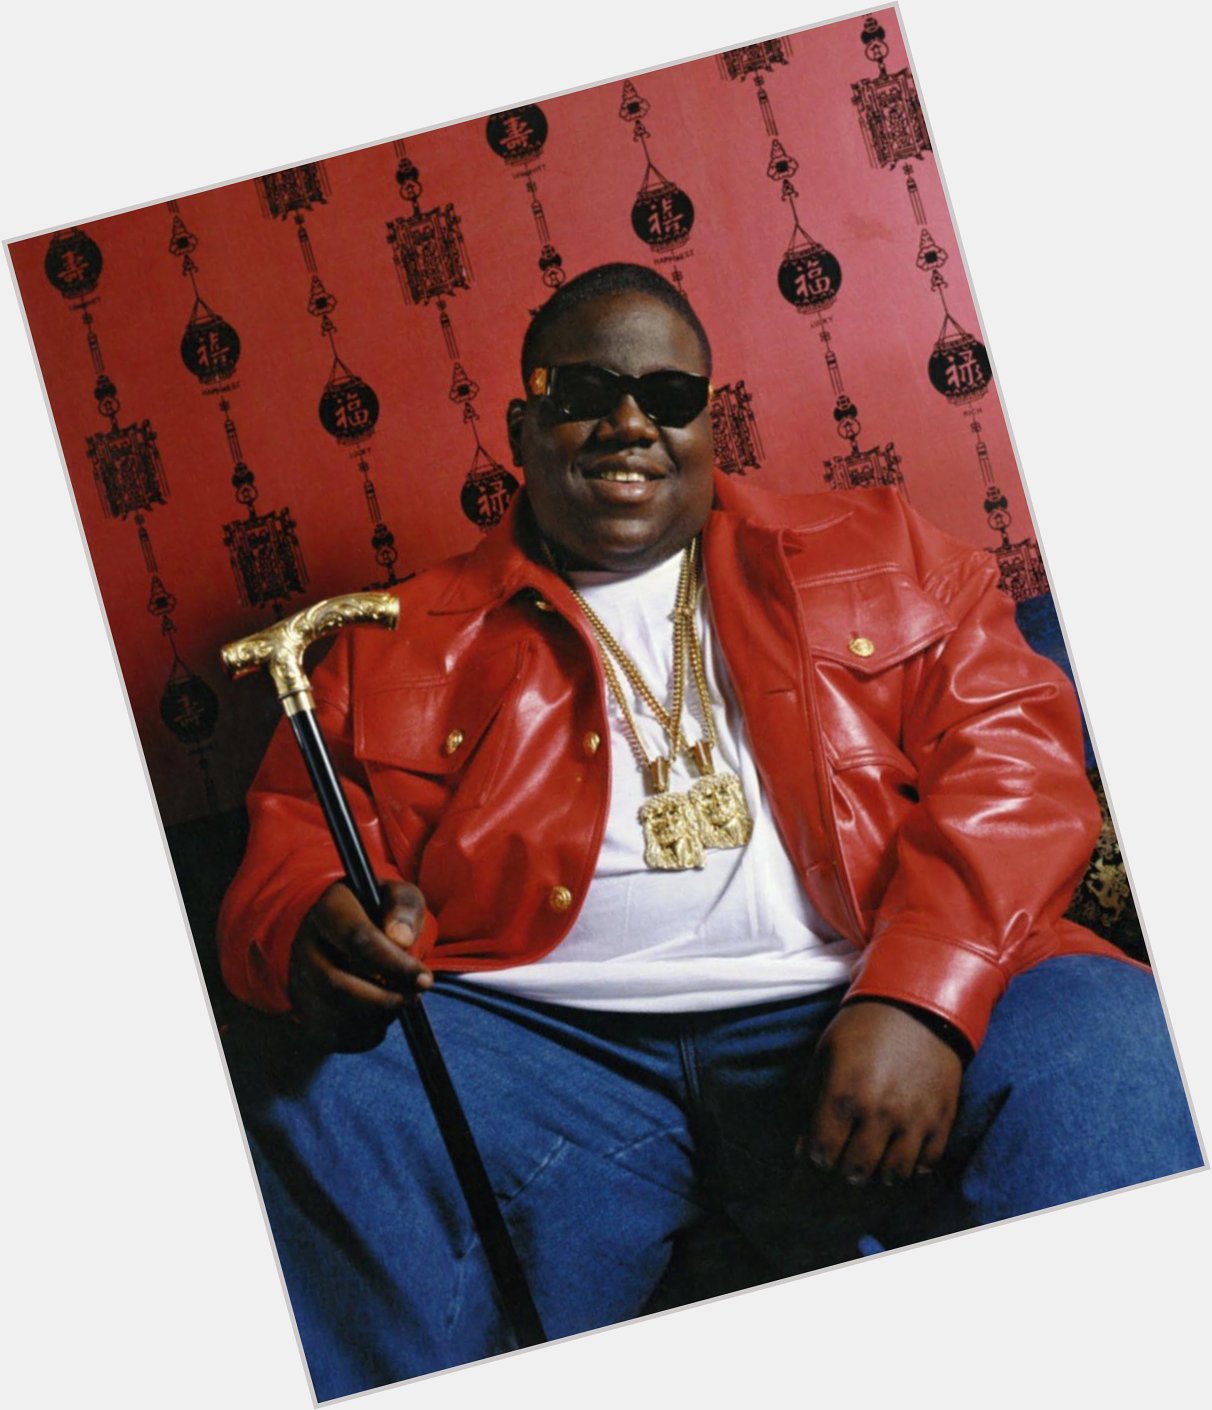 Happy Birthday to The Notorious B.I.G. aka Biggie Smalls, who would have turned 43 today! 